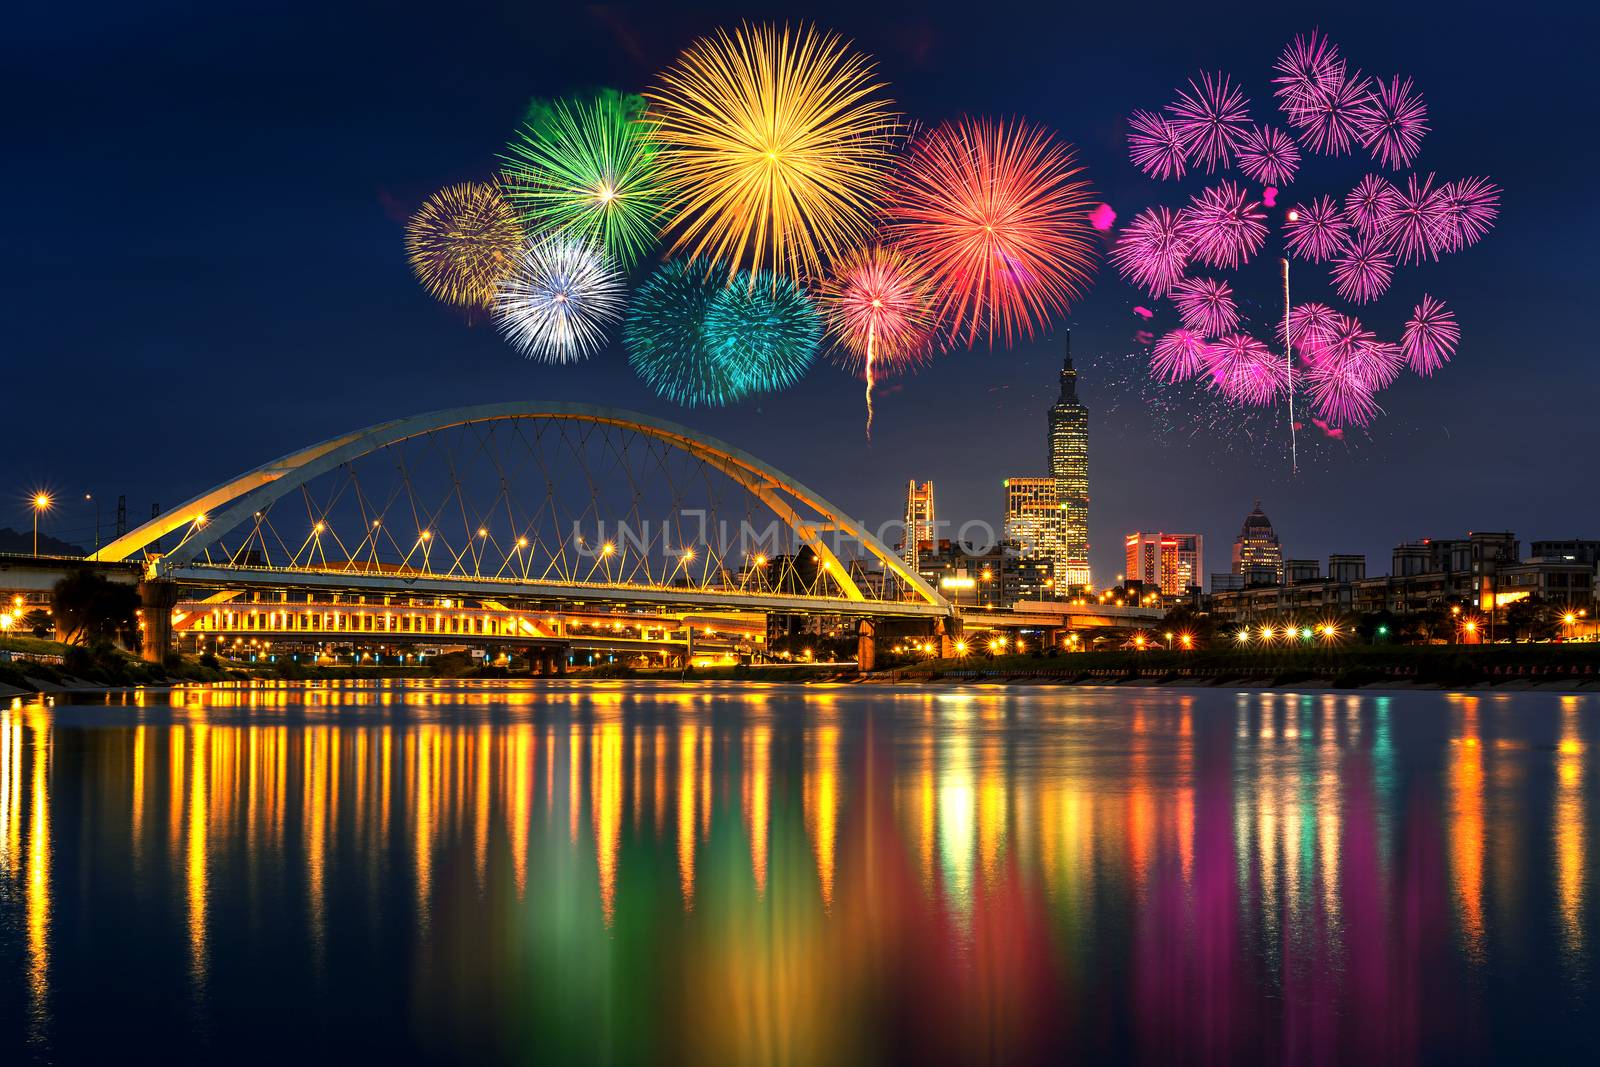 Fireworks festival at night in Taipei, Taiwan. by gutarphotoghaphy